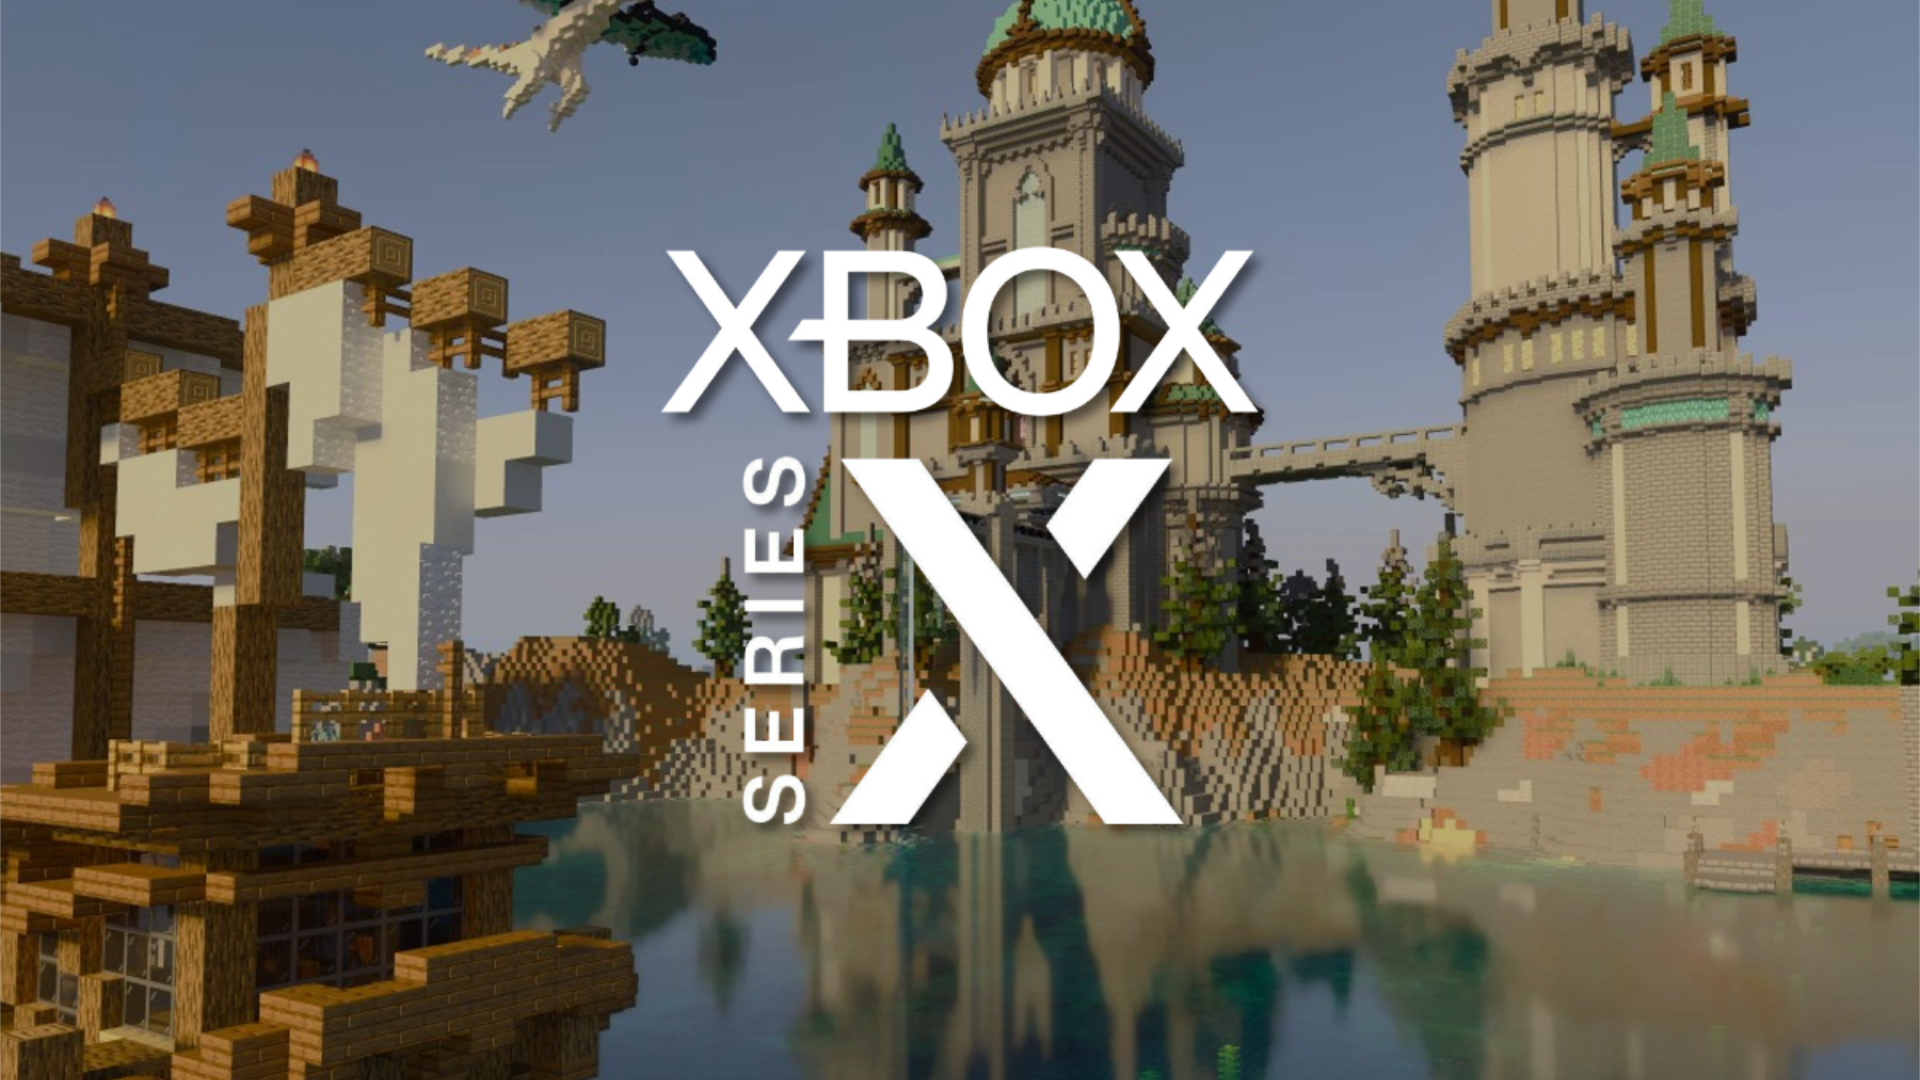 Minecraft has been rated for Xbox Series X/S